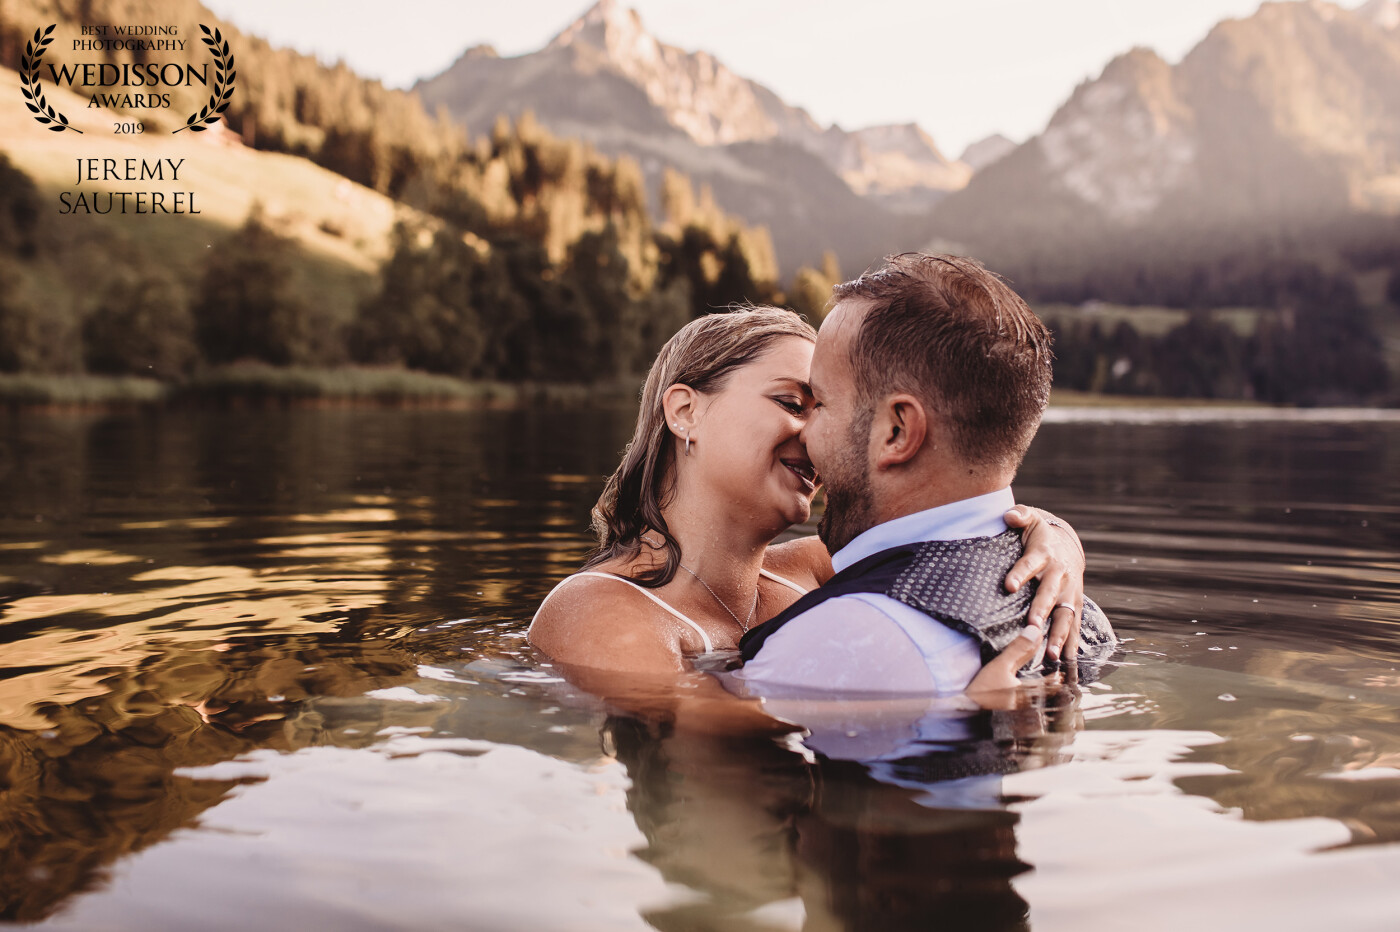 After their wedding, the newlyweds contacted me because they wanted to do a special Day After session. I suggested this beautiful lake surrounded by mountains. This beautiful place is in Switzerland. We were able to enjoy the beautiful sunlight to make some pictures in the lake after they jumped from the pontoon.